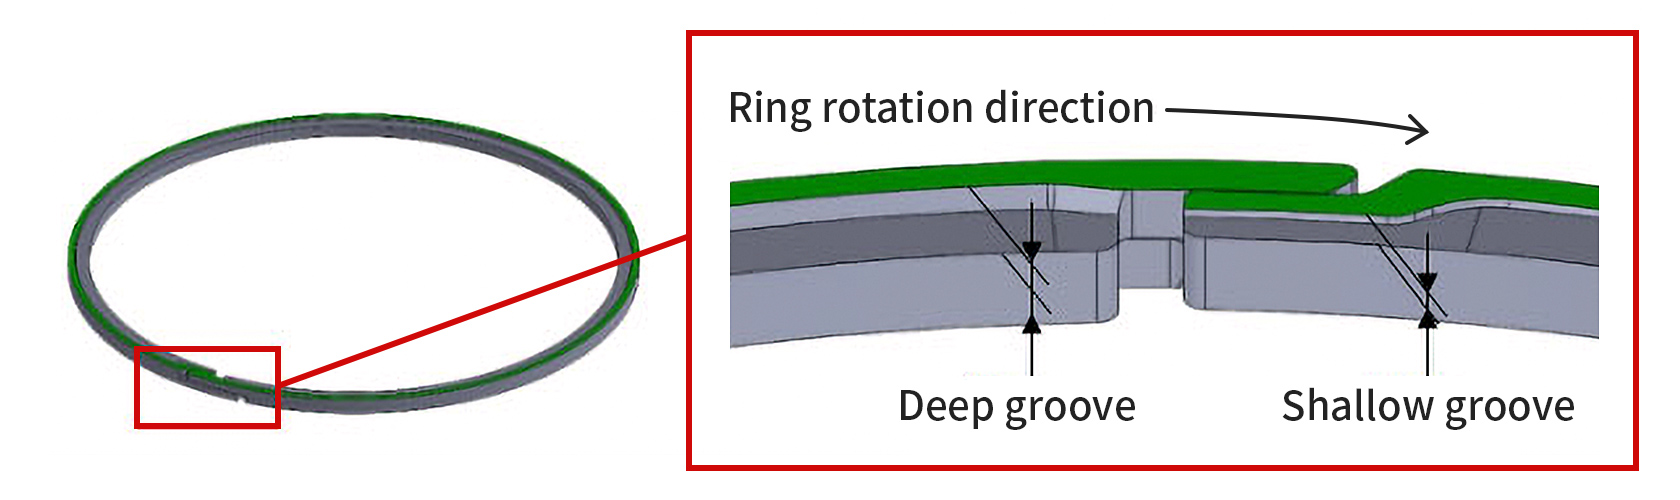 Ring rotation direction/Deep groove/Shallow groove